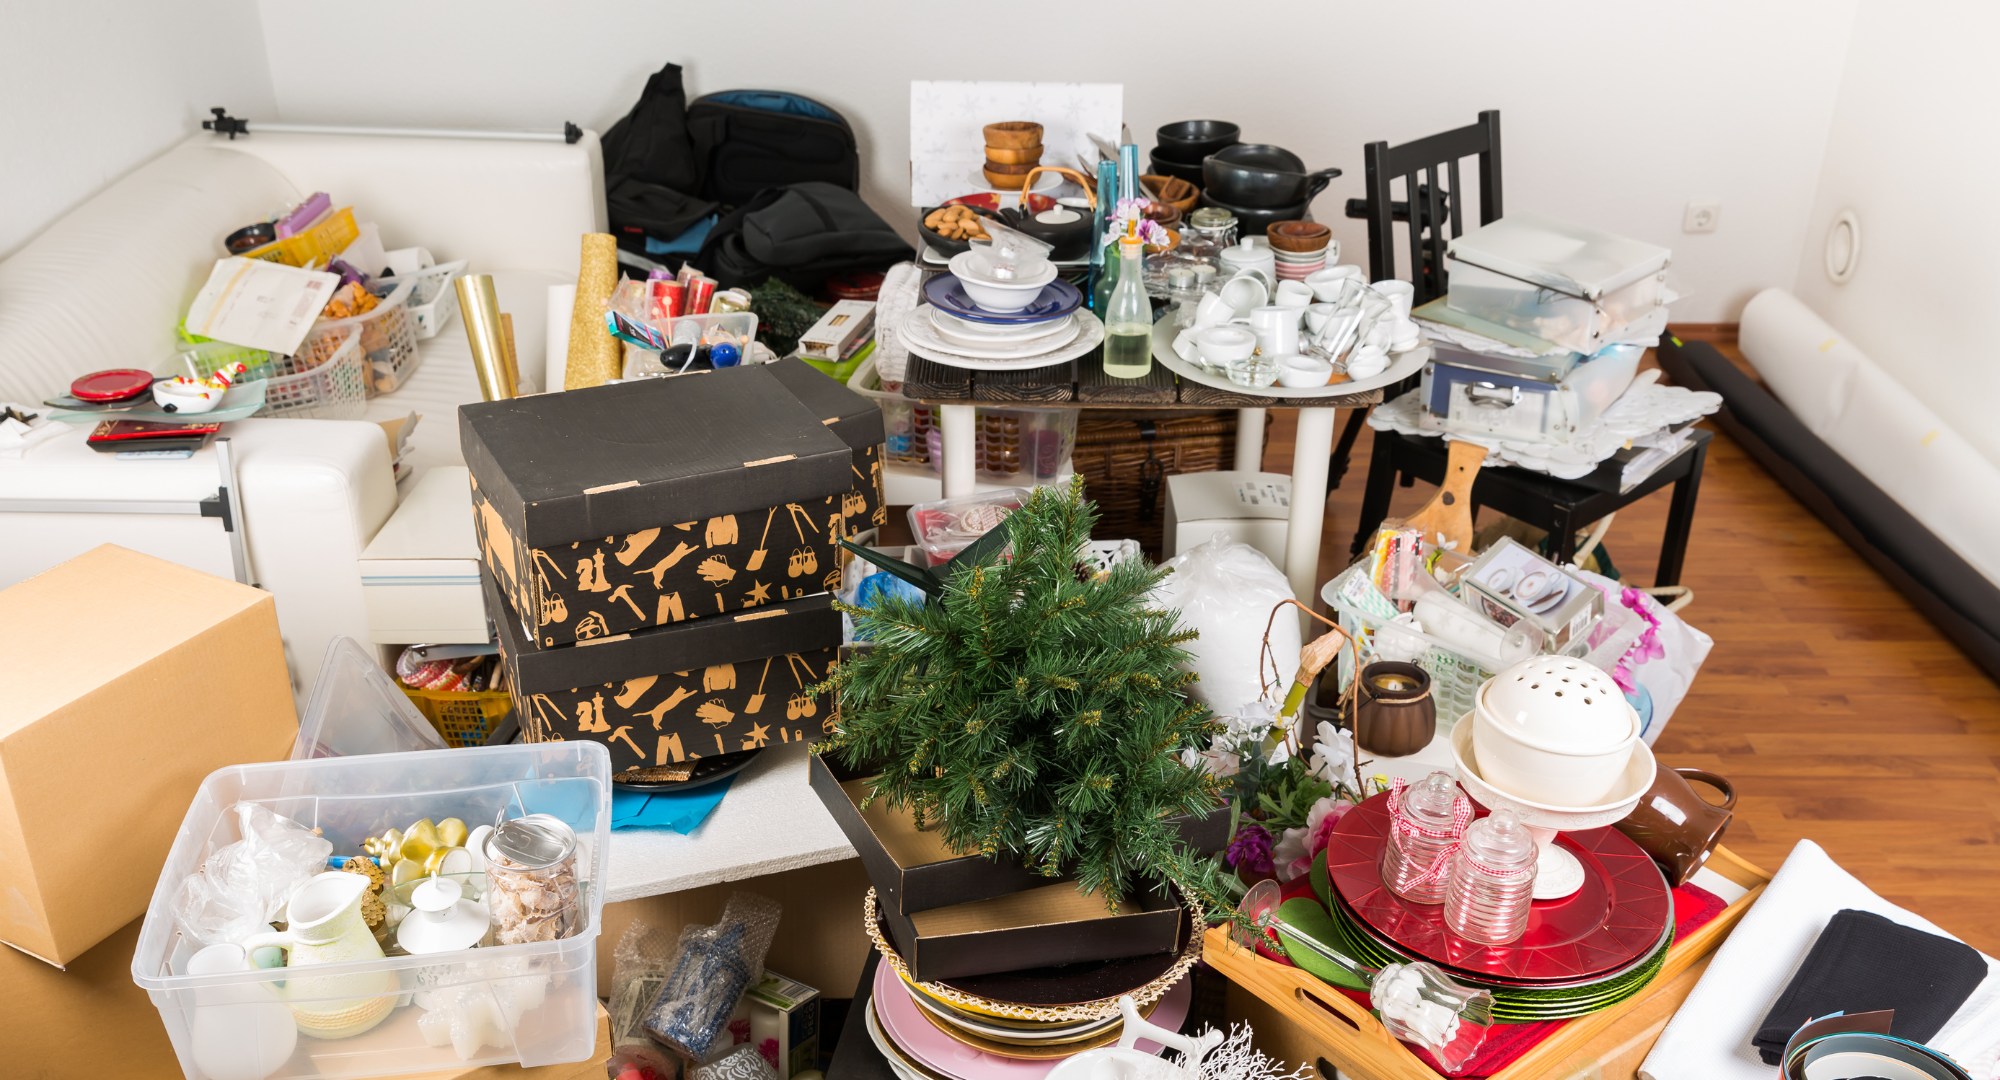 a cluttered space is not healthy or a balanced lifestyle